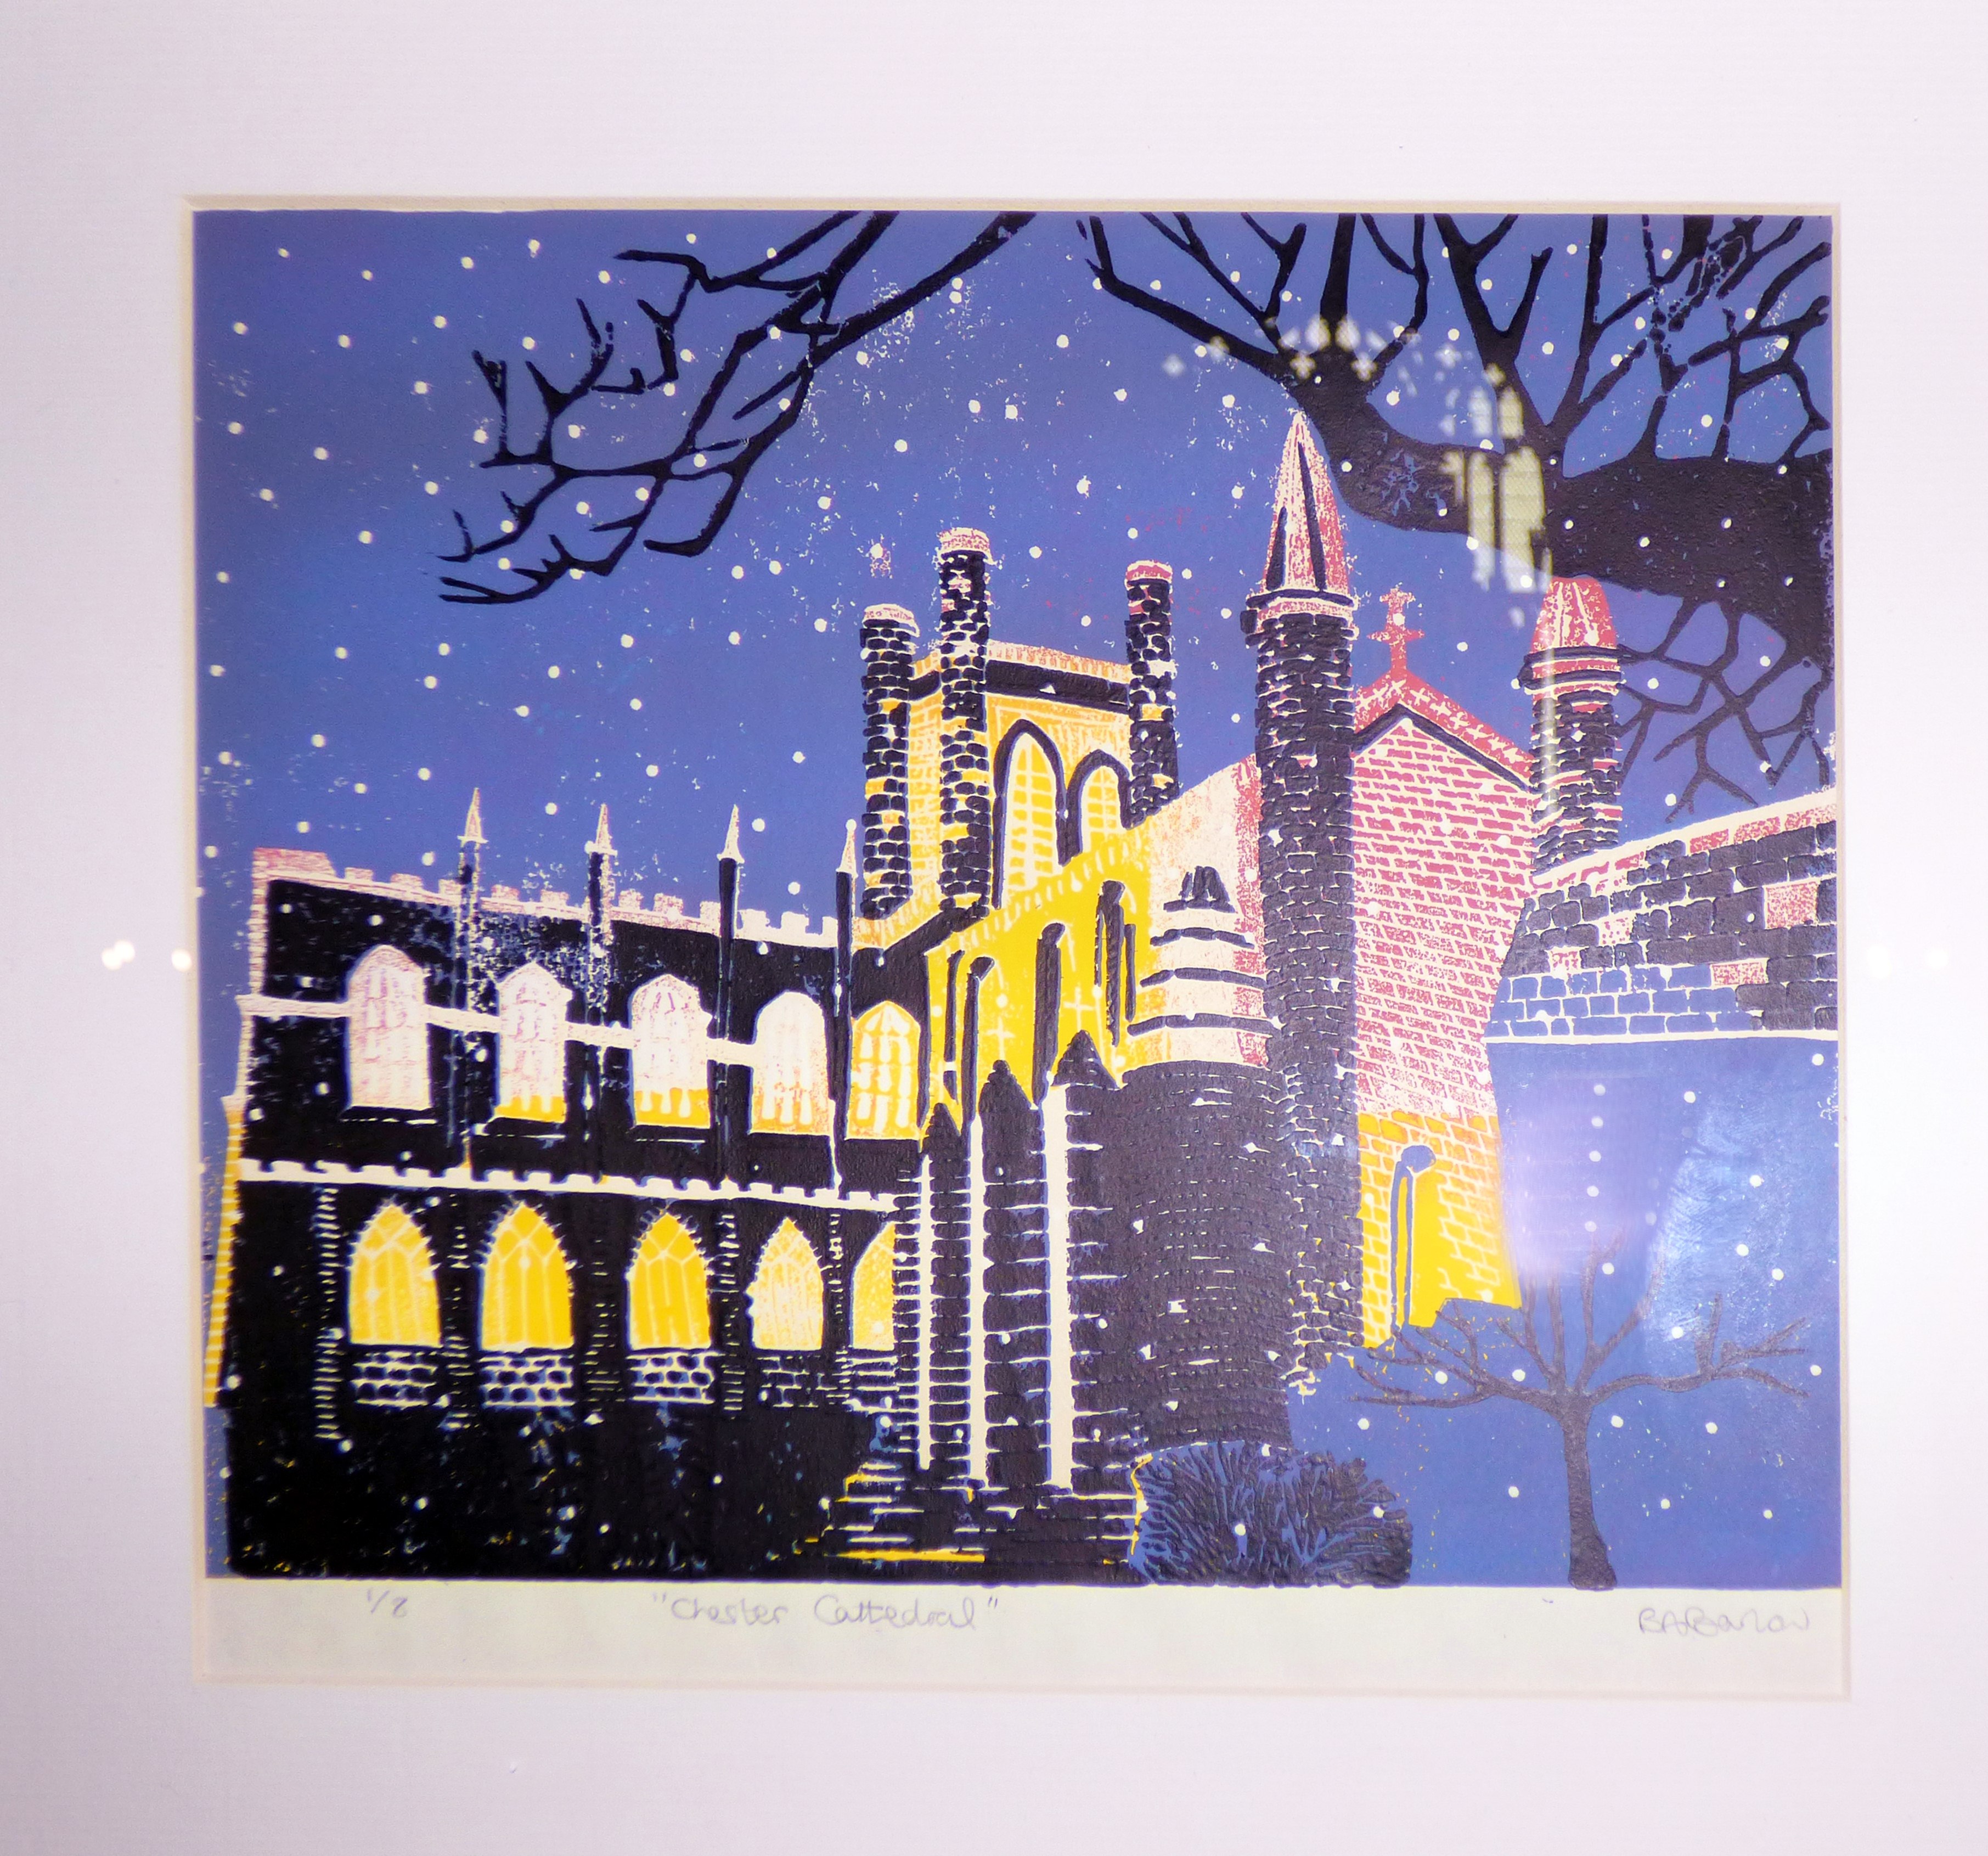 CHESTER CATHEDRAL by Barbara Barlow, reduction linocut, In All Its Glory exhibition, Chester Cathedral 2016